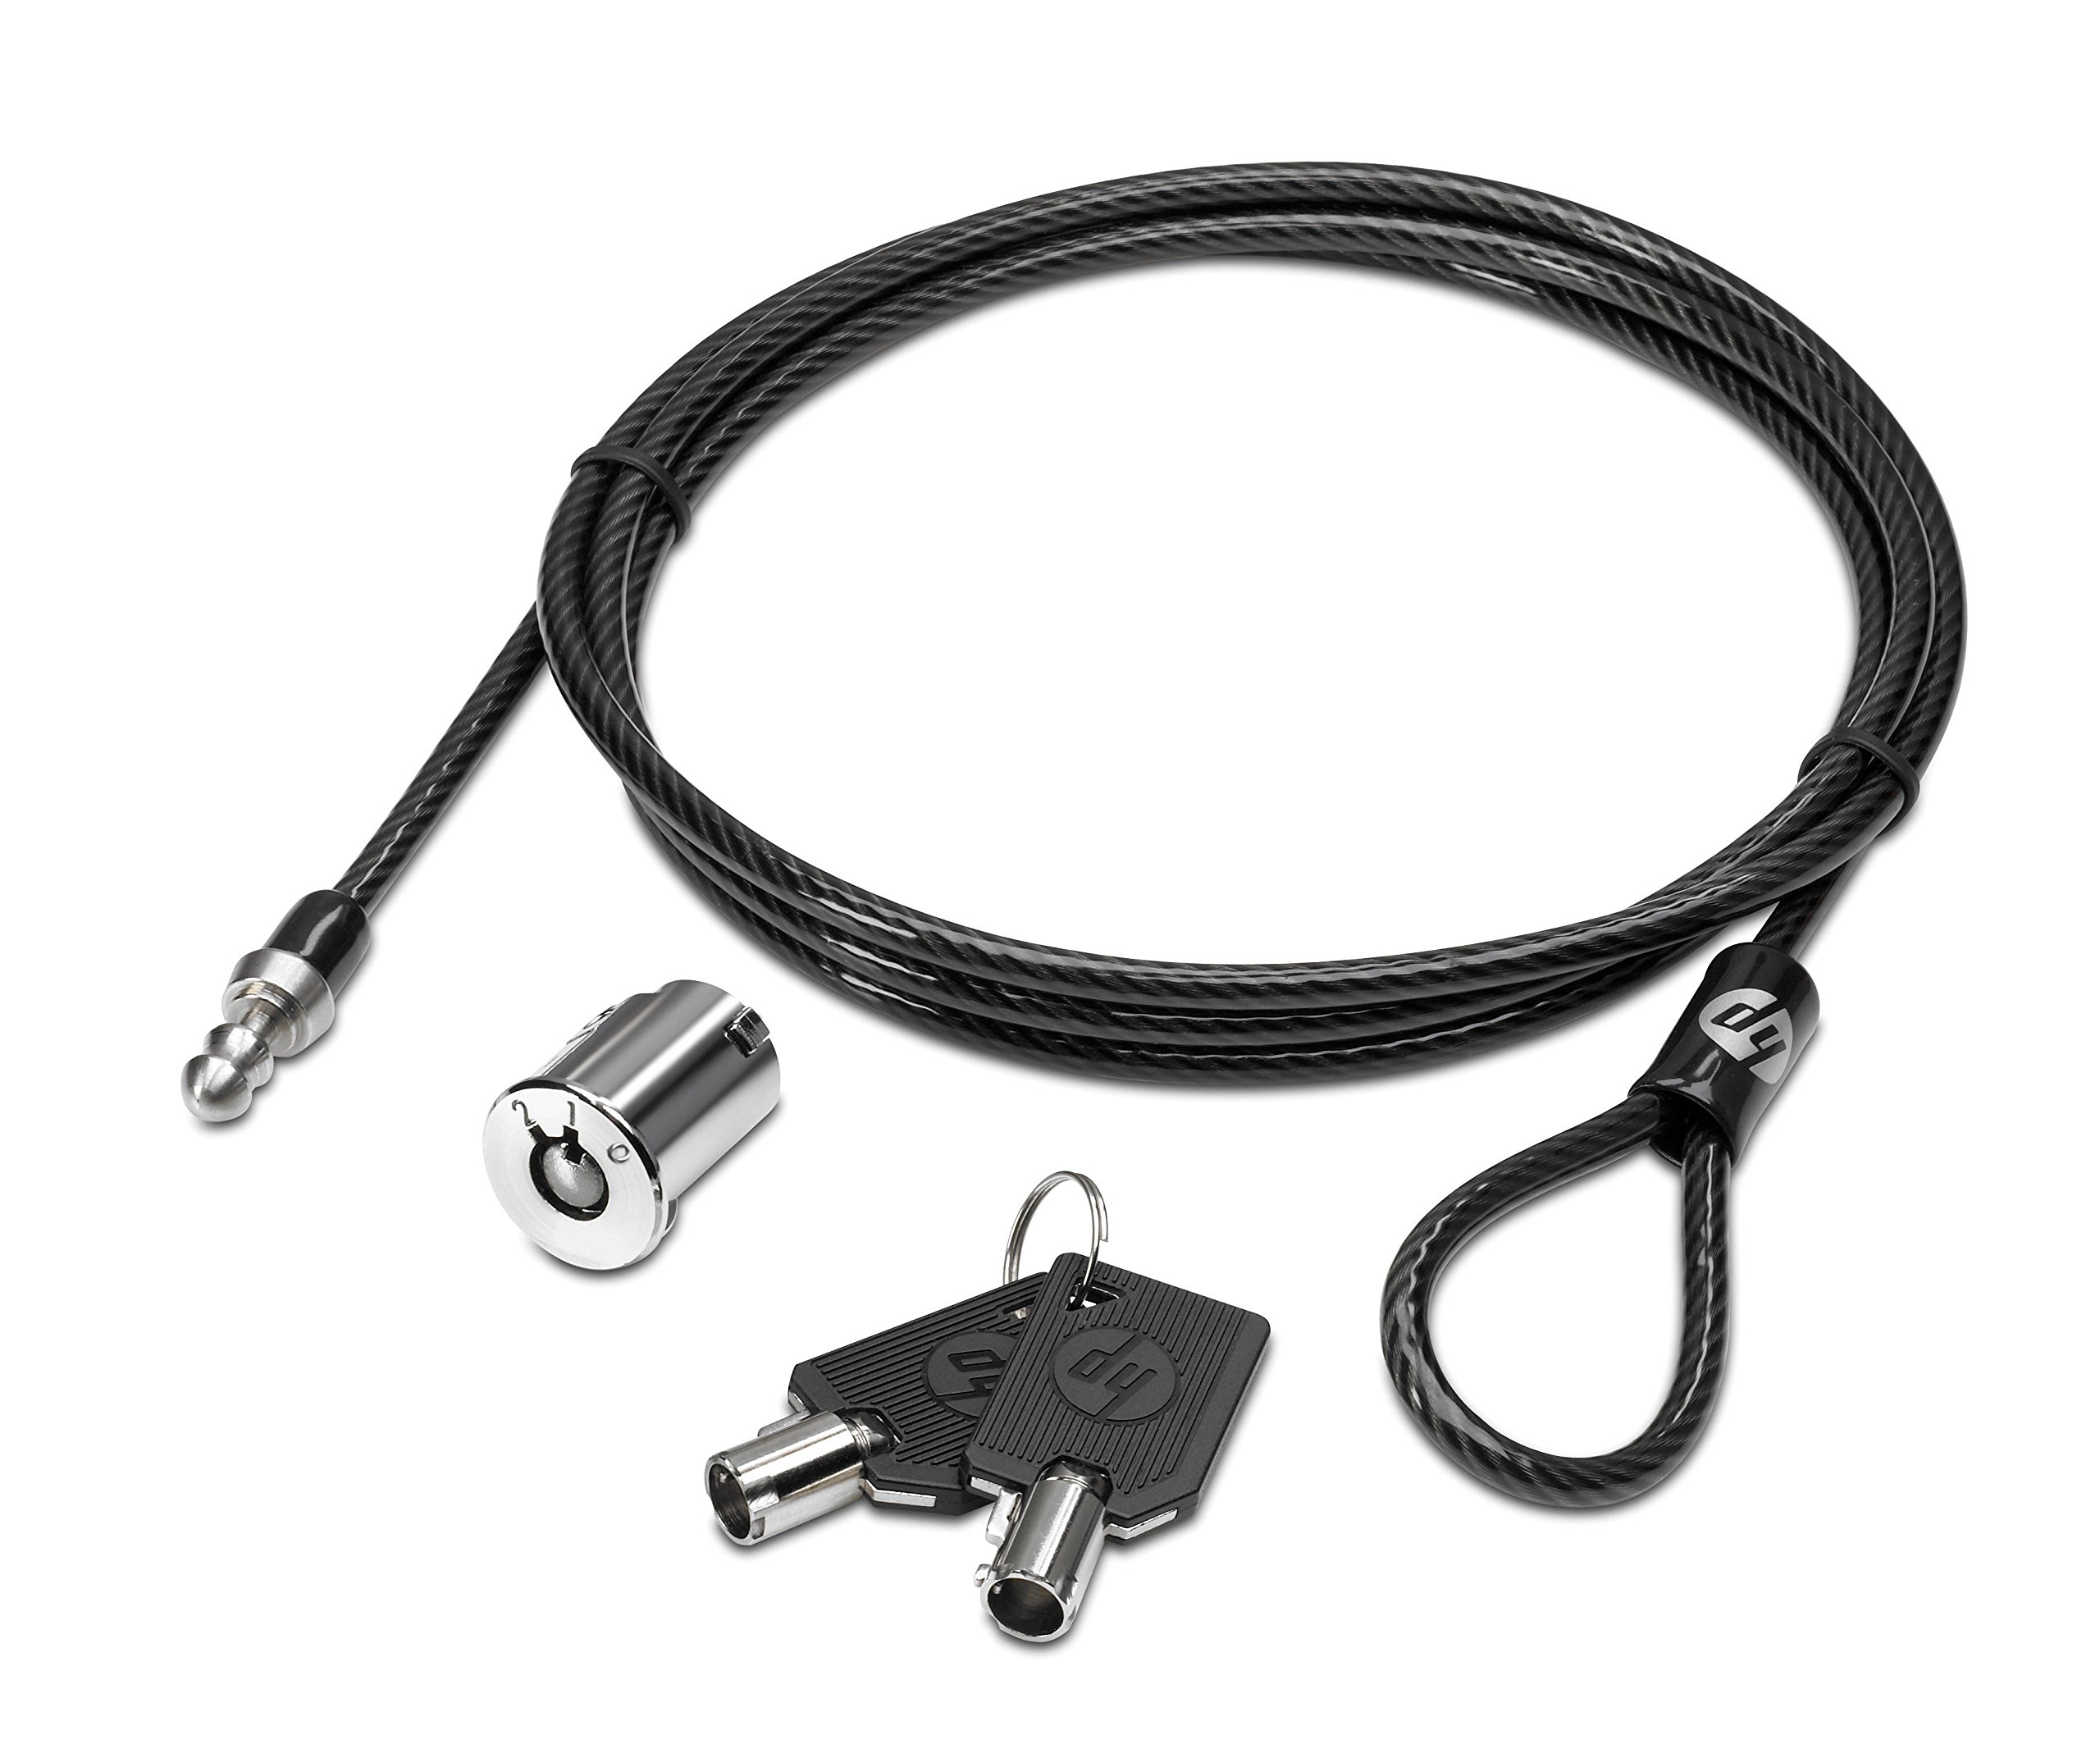 DOCKING STATION CABLE LOCK